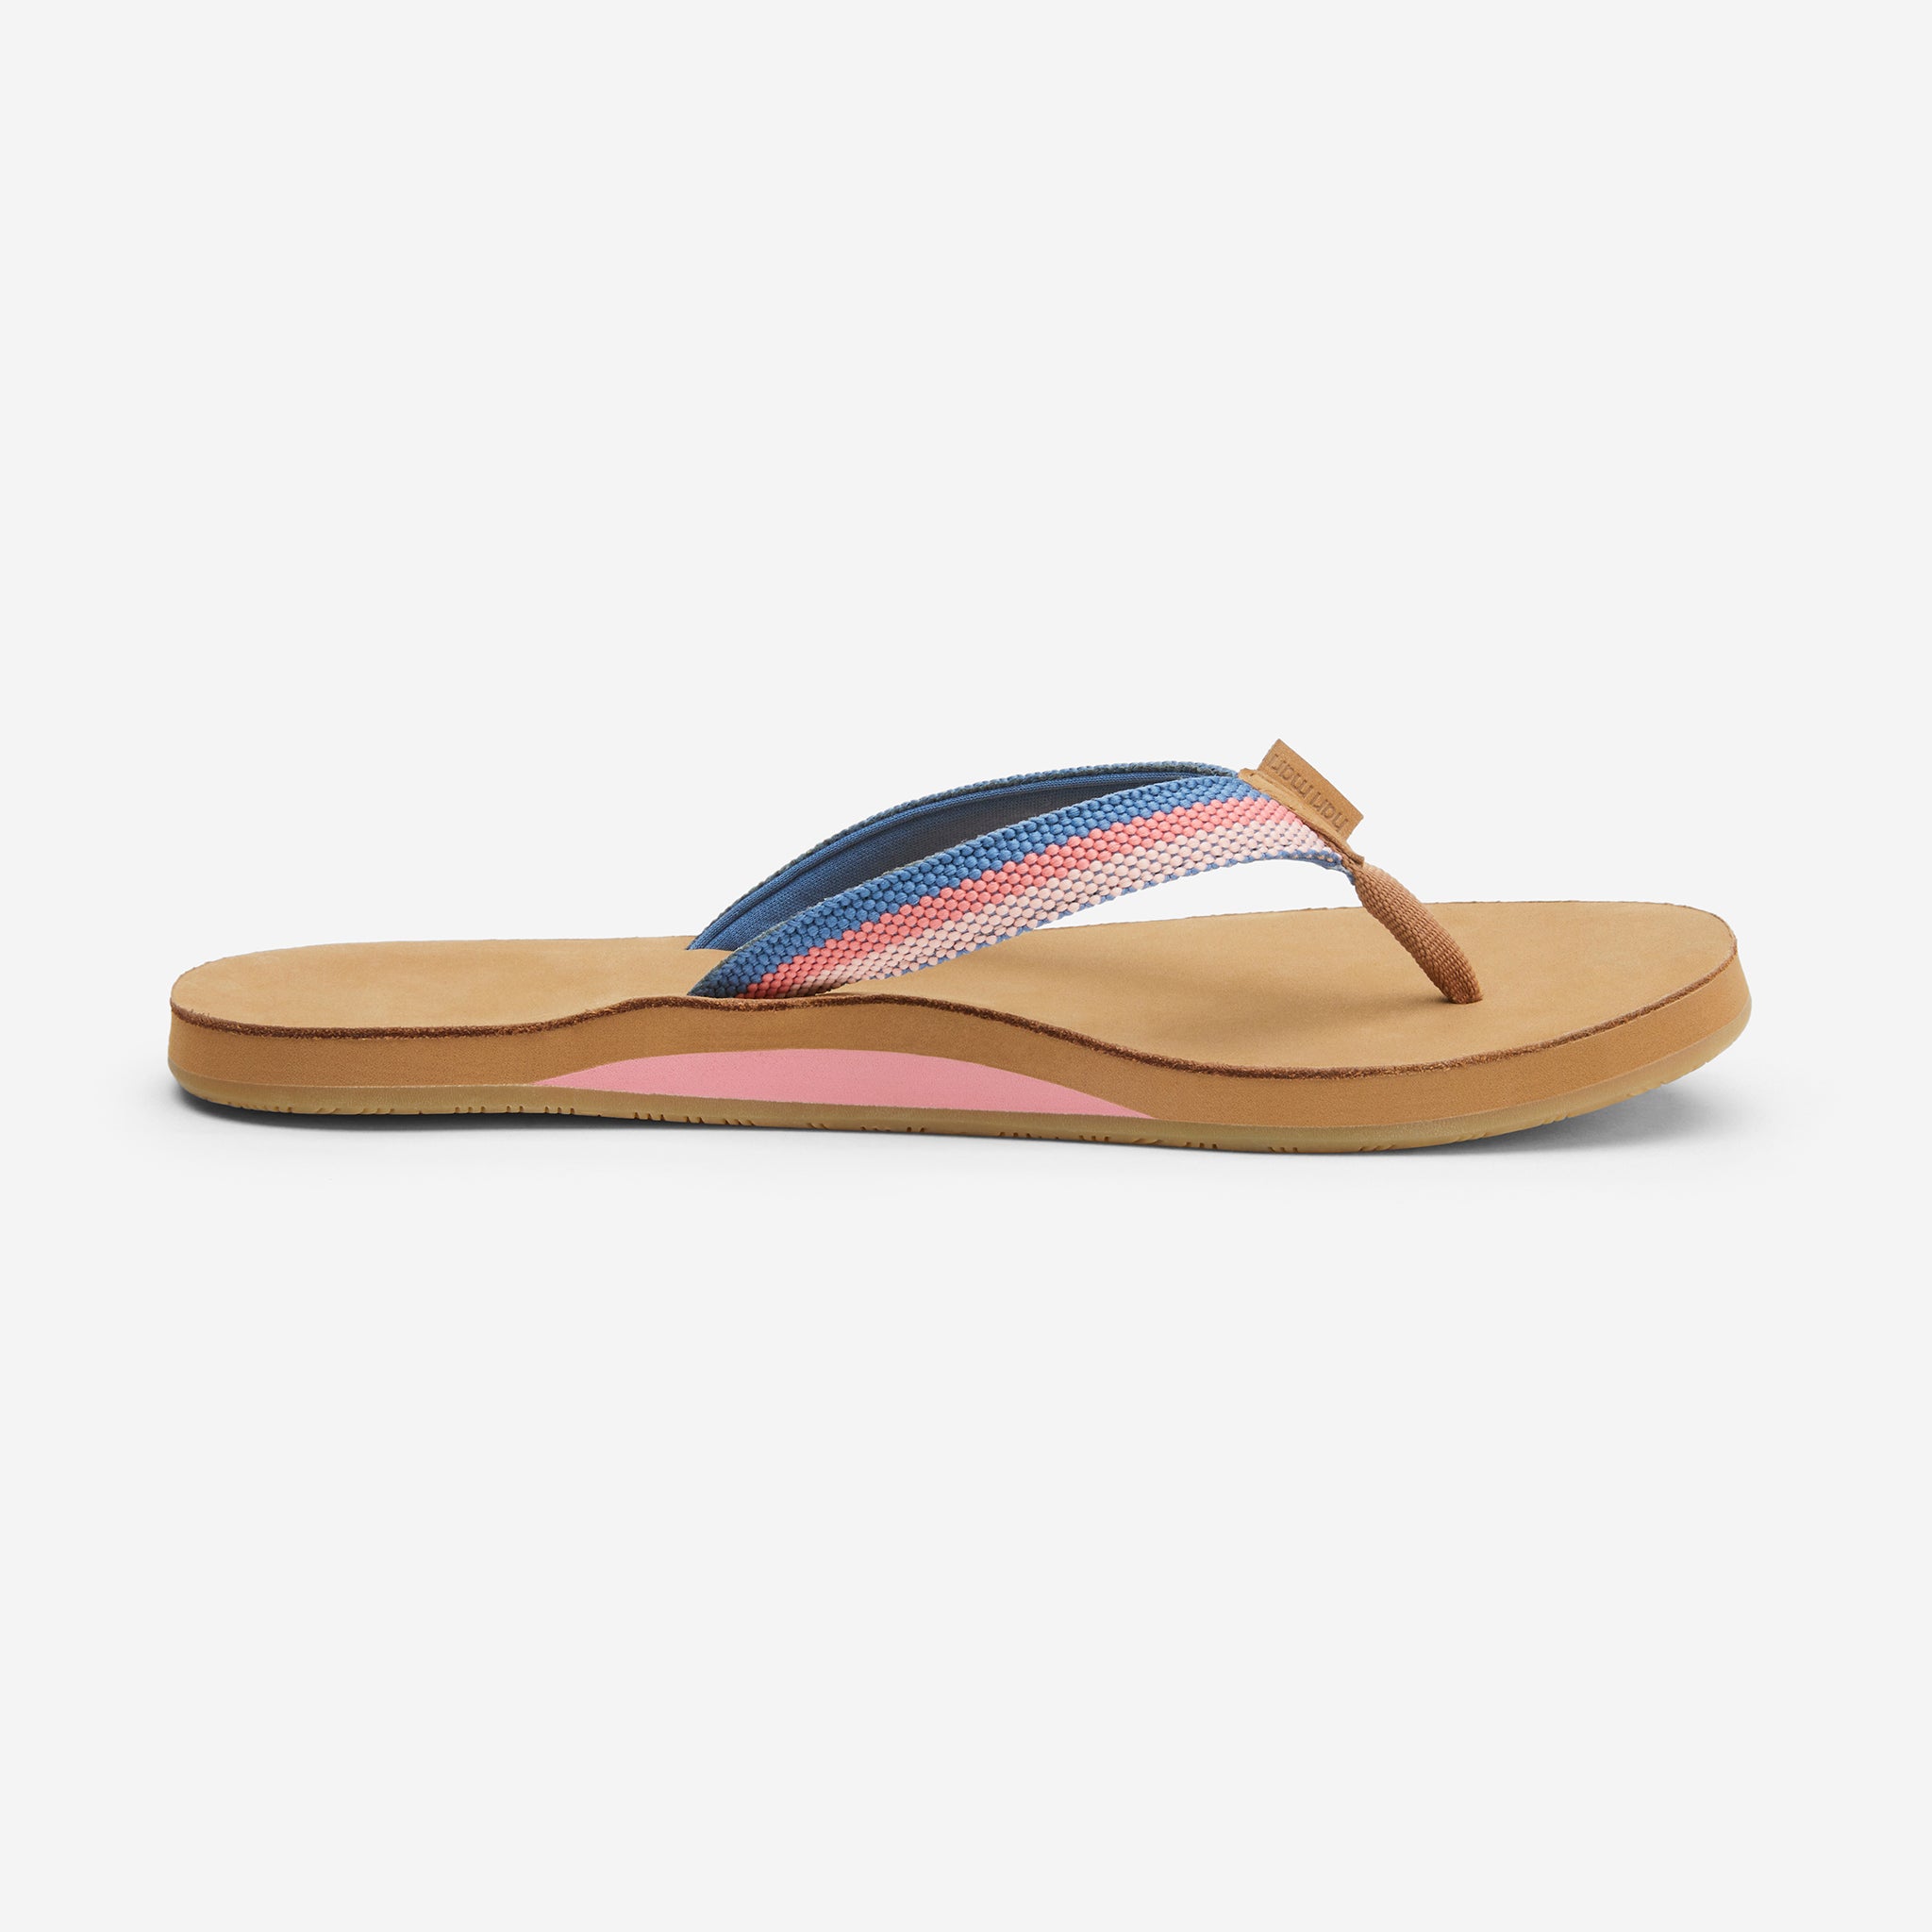 women's tan leather flip flops with colorful straps